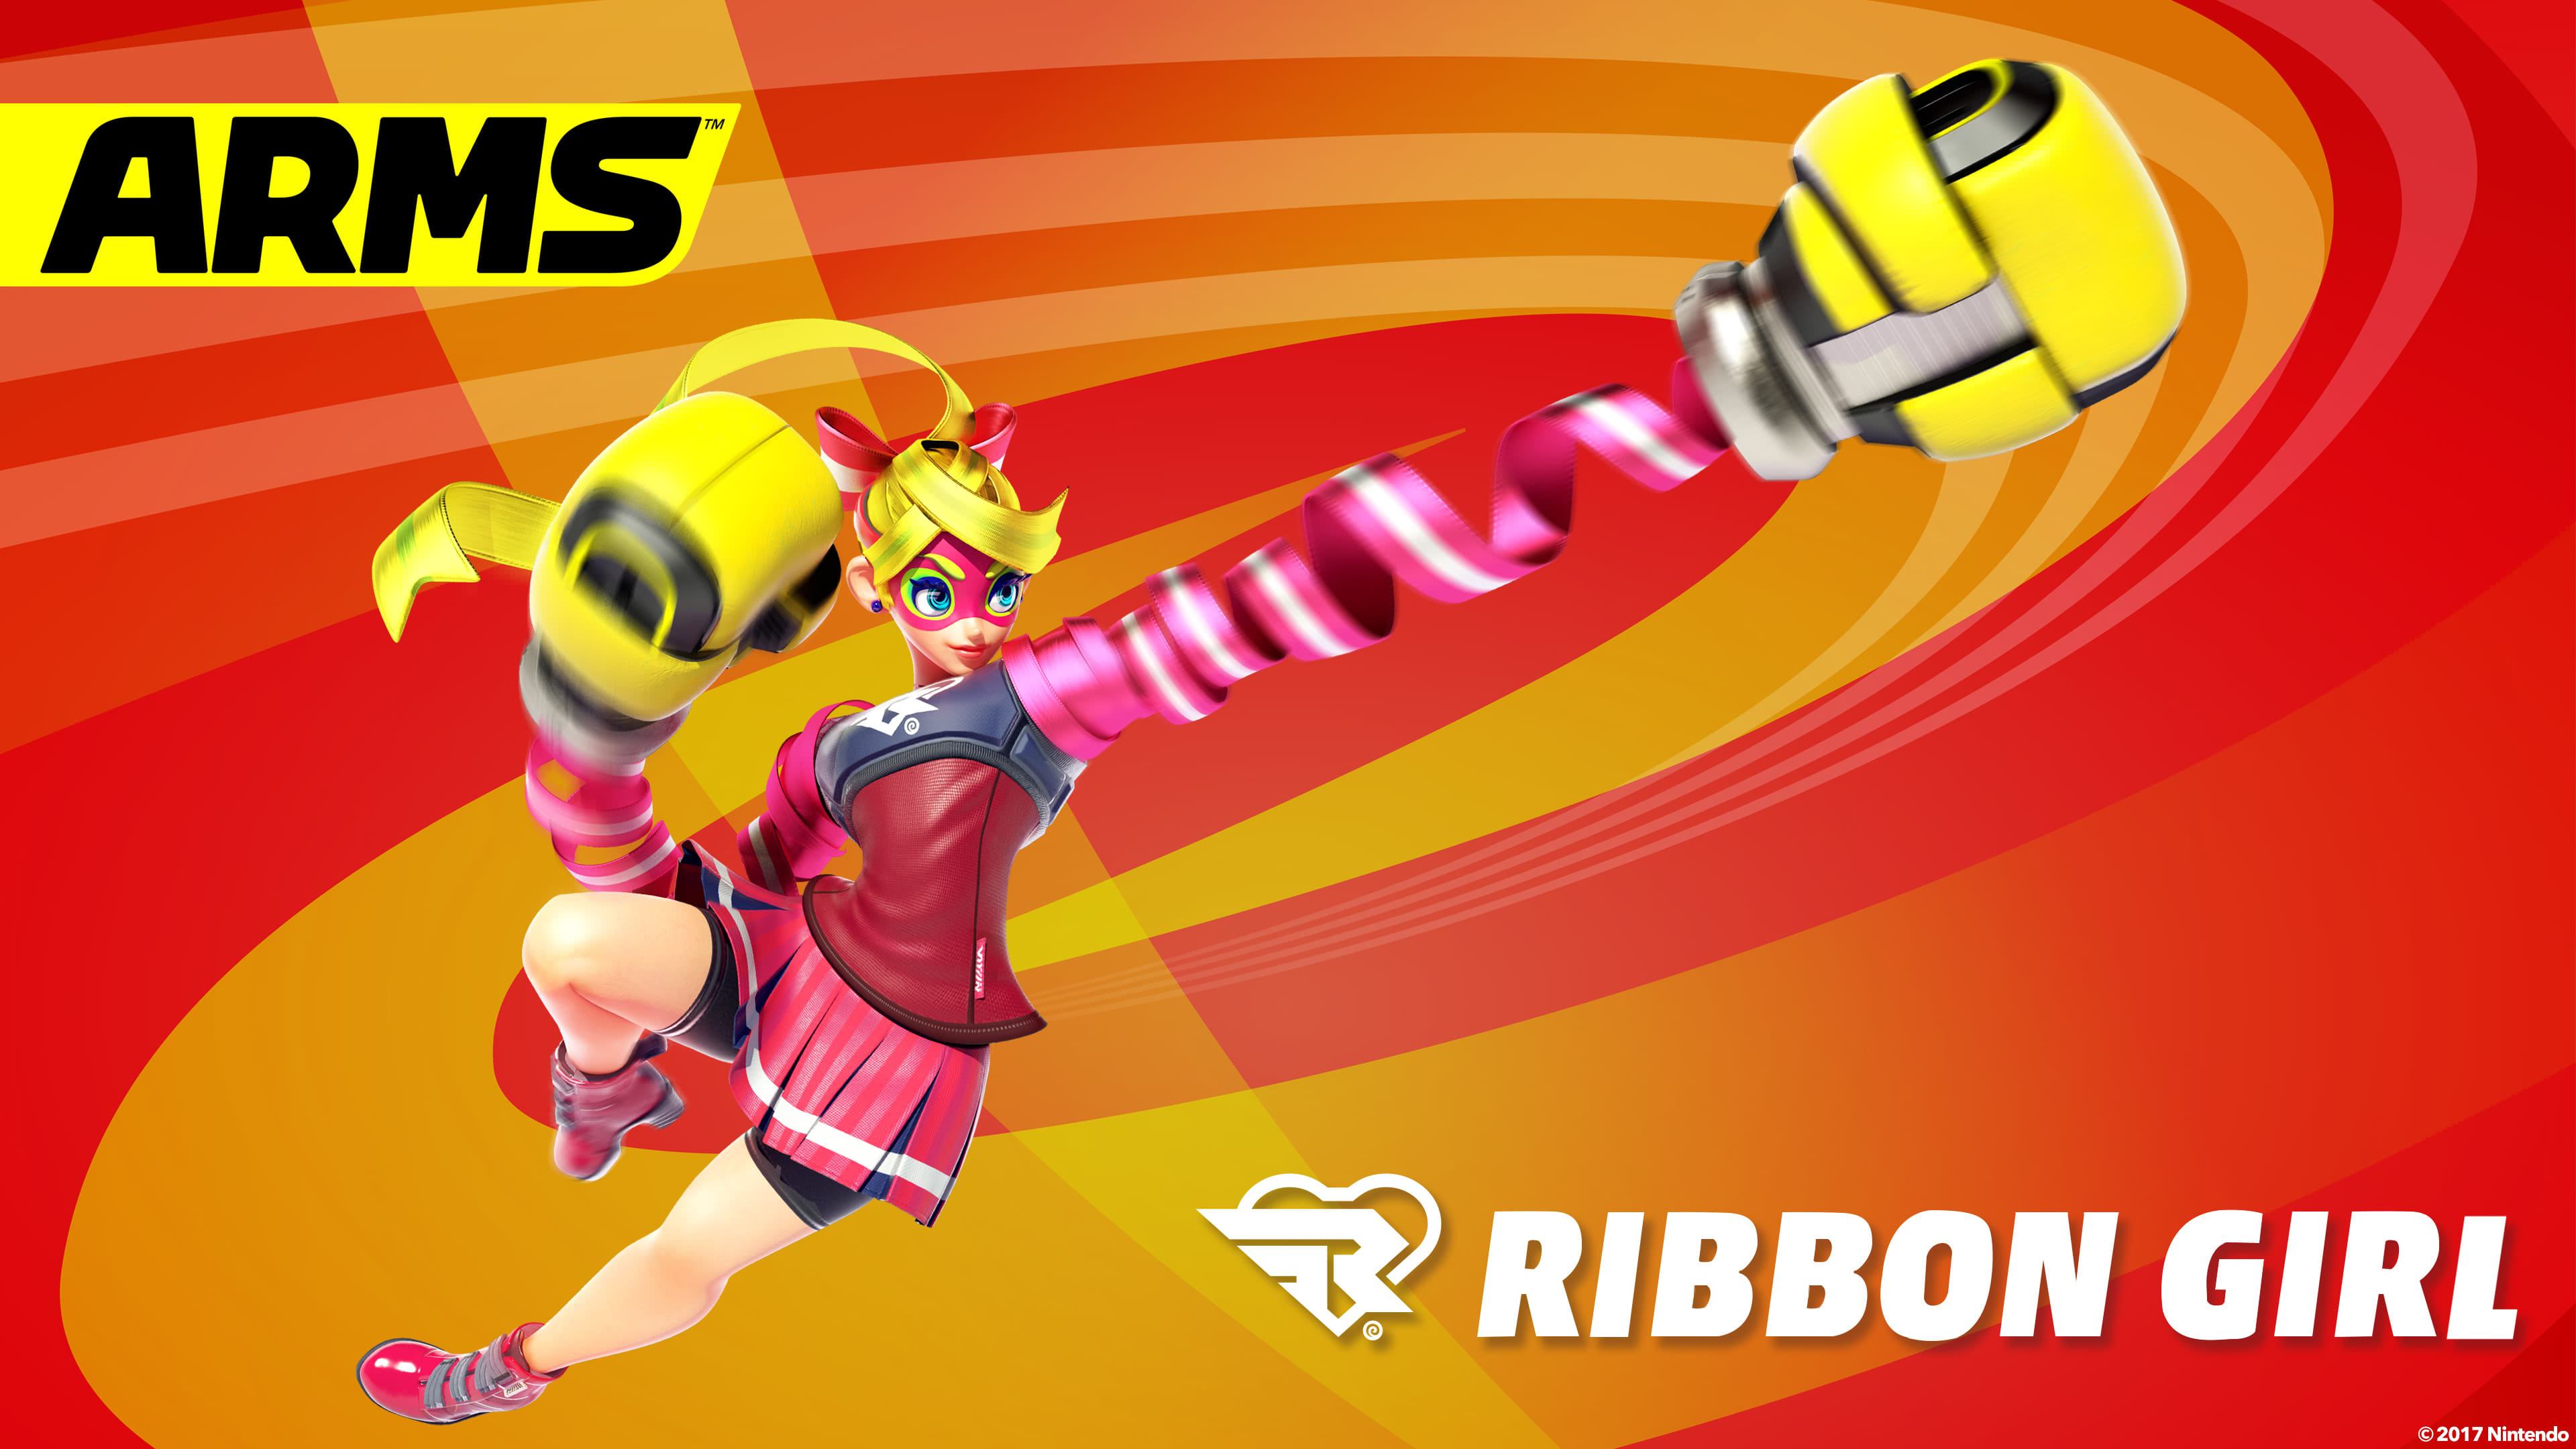 ann sharry recommends Ribbon Girl Arms